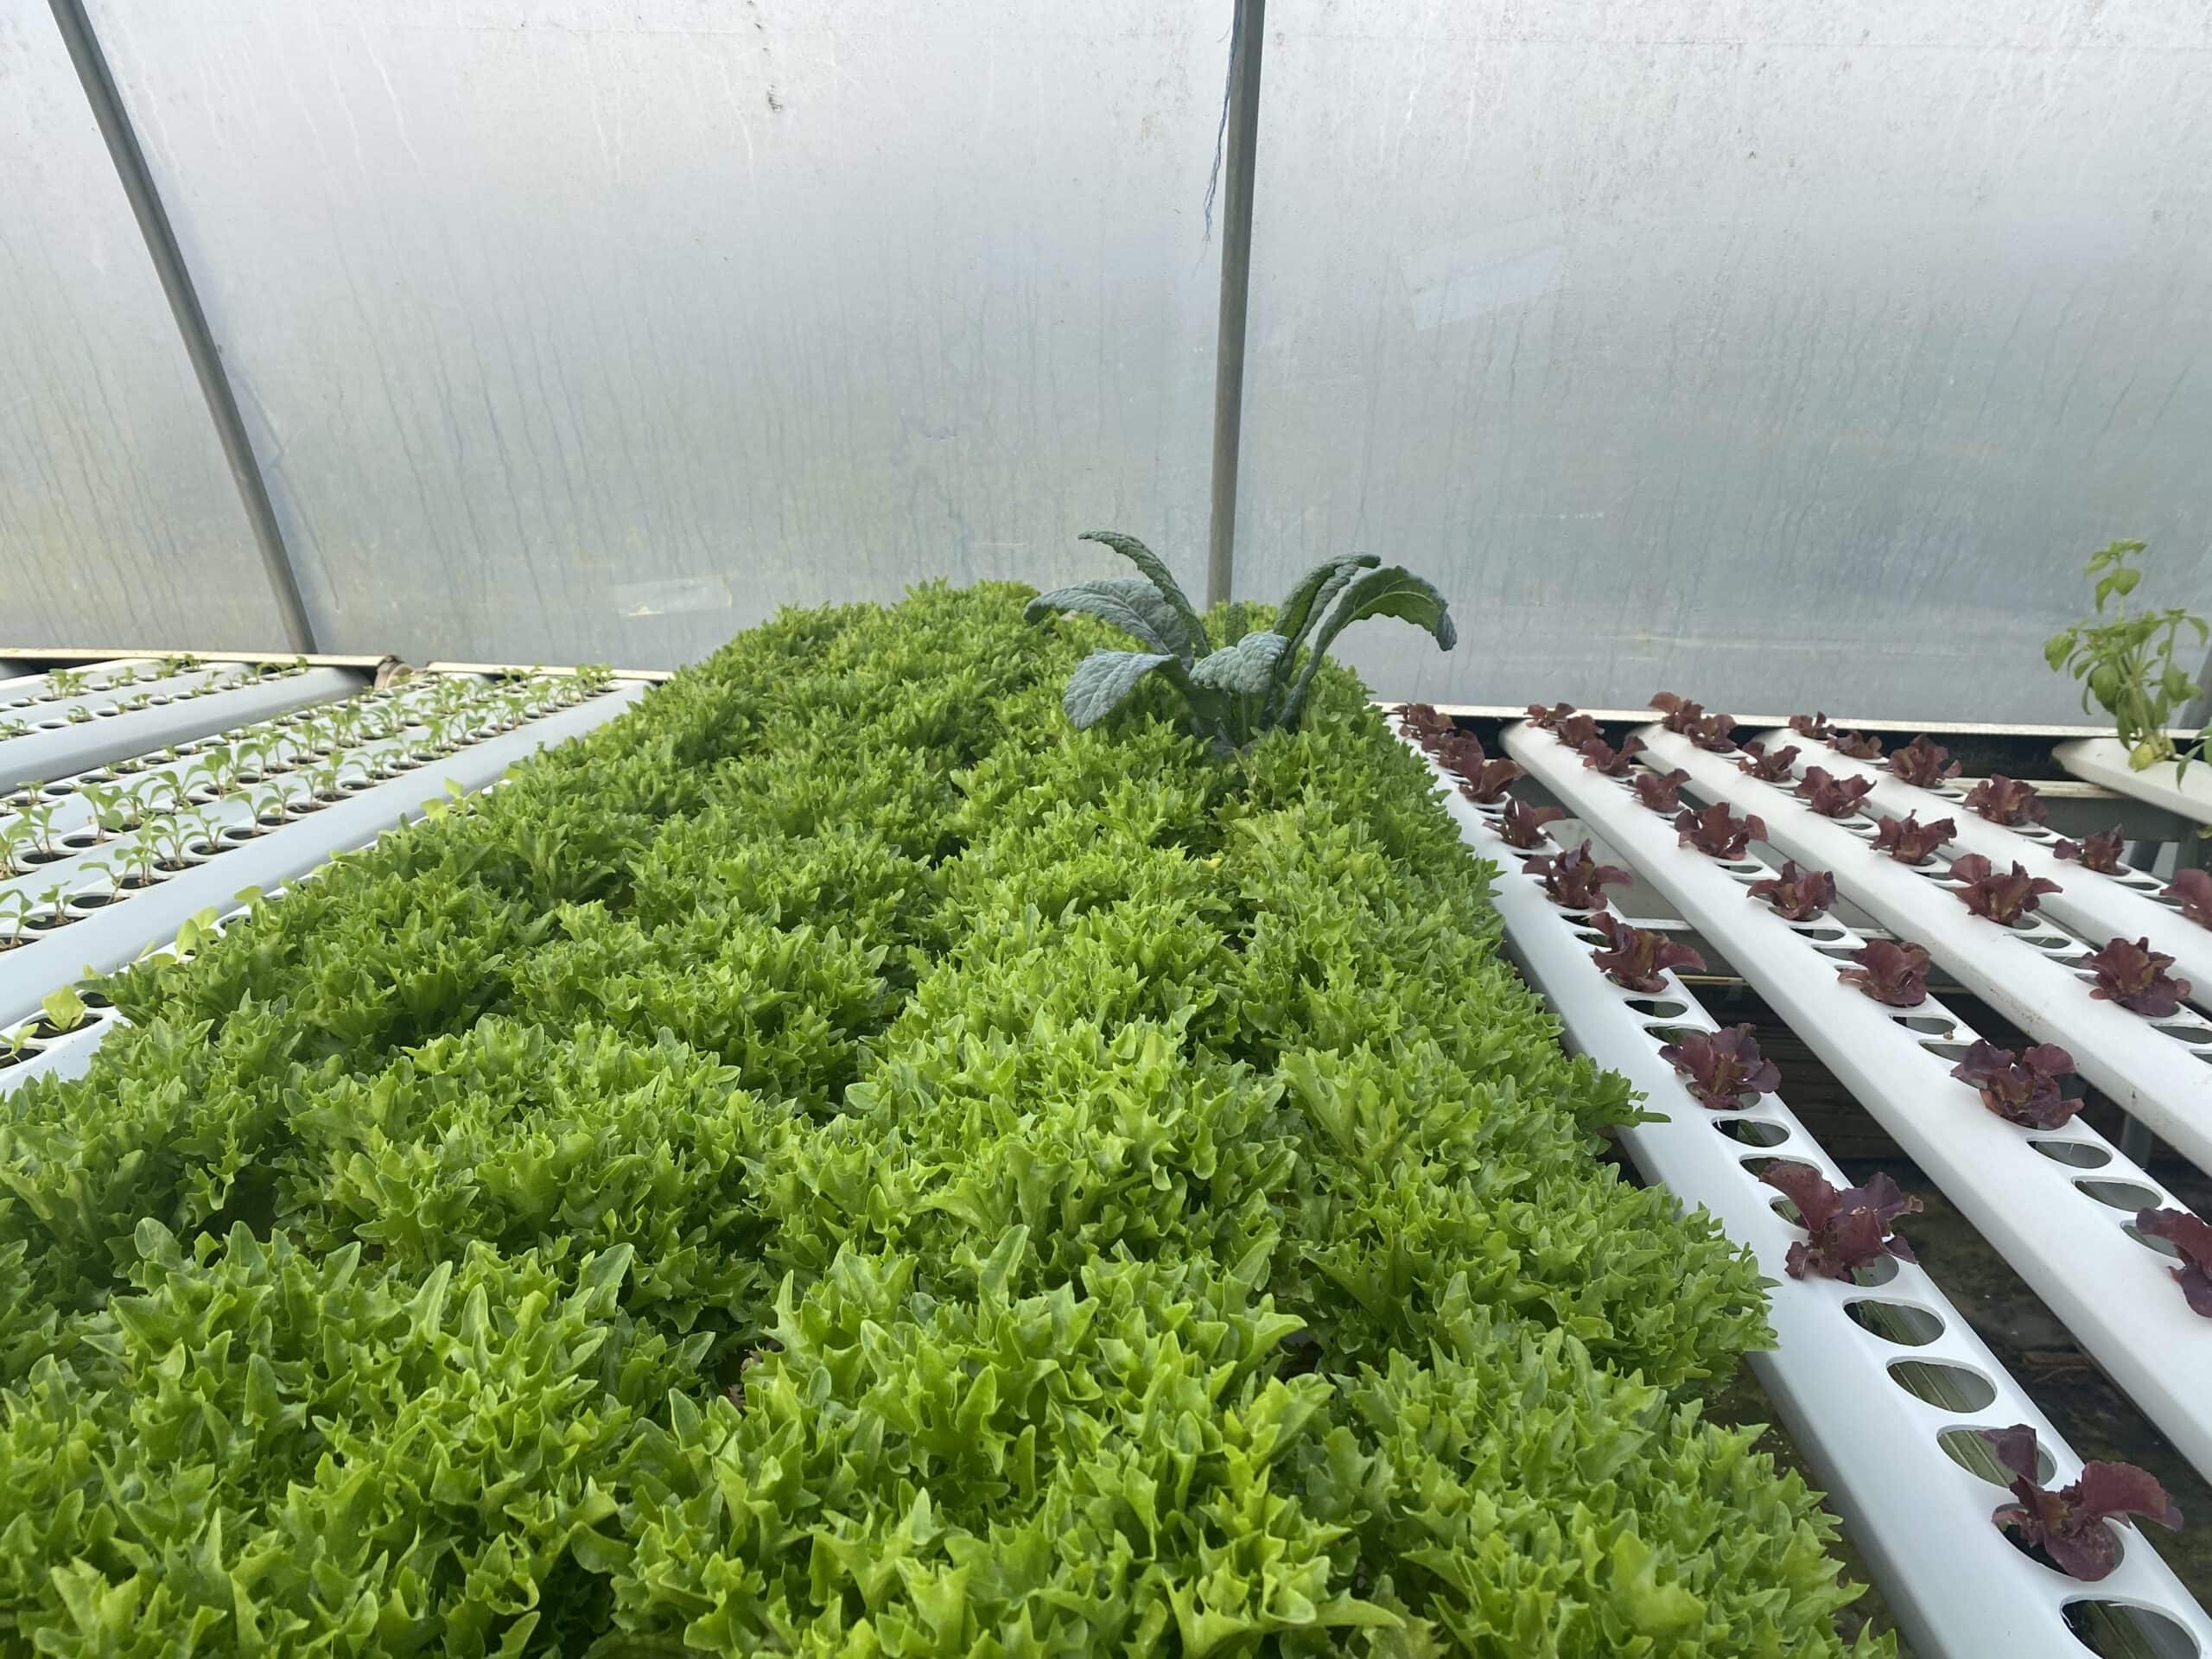 4 rows of green curly leaf lettuce growing hydroponically. In the back is one lone lacinato kale, towering above the lettuce